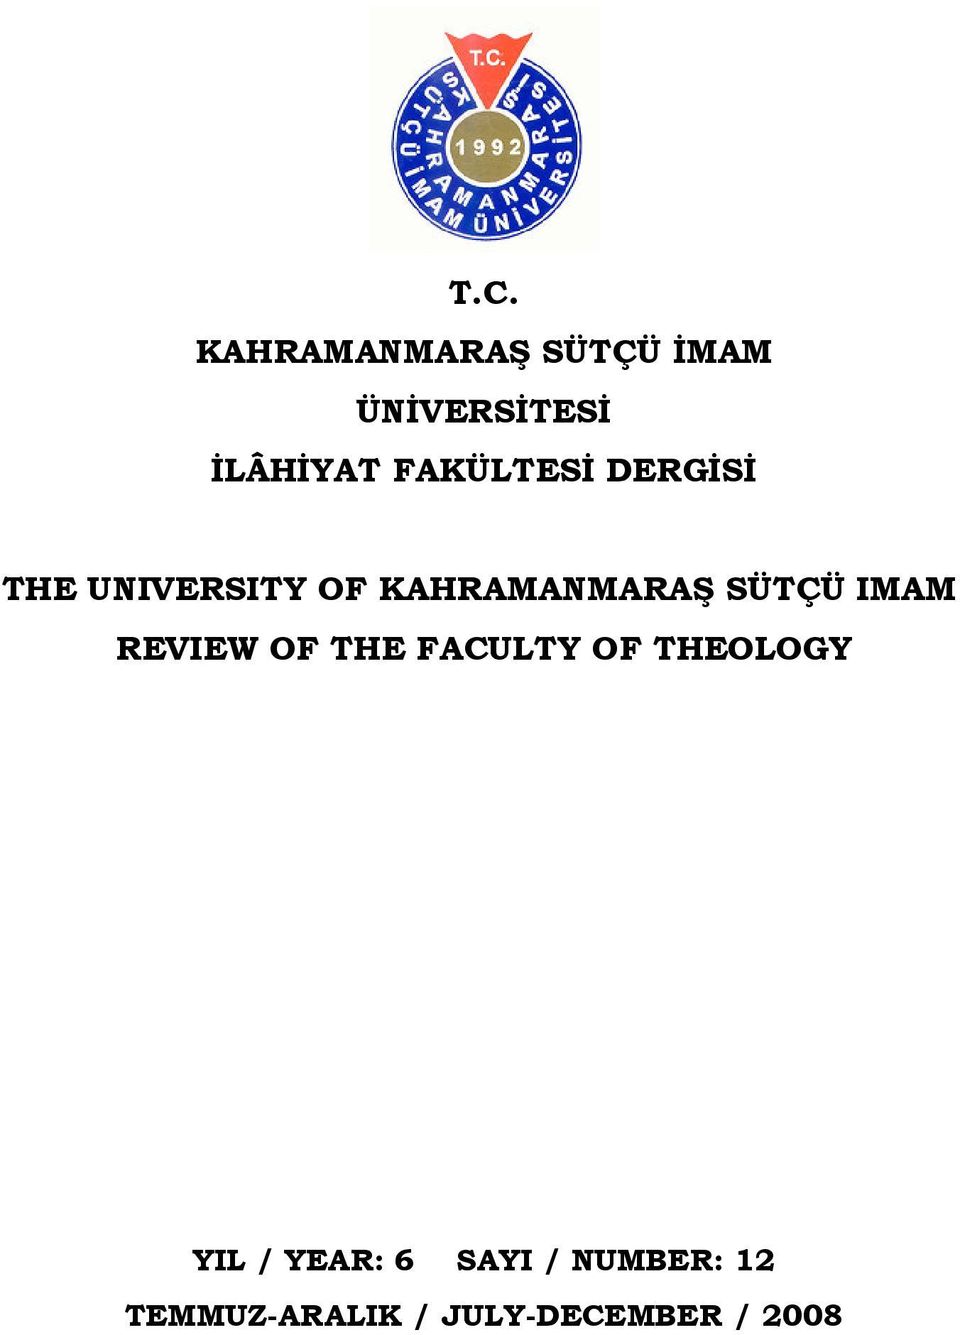 SÜTÇÜ IMAM REVIEW OF THE FACULTY OF THEOLOGY YIL /